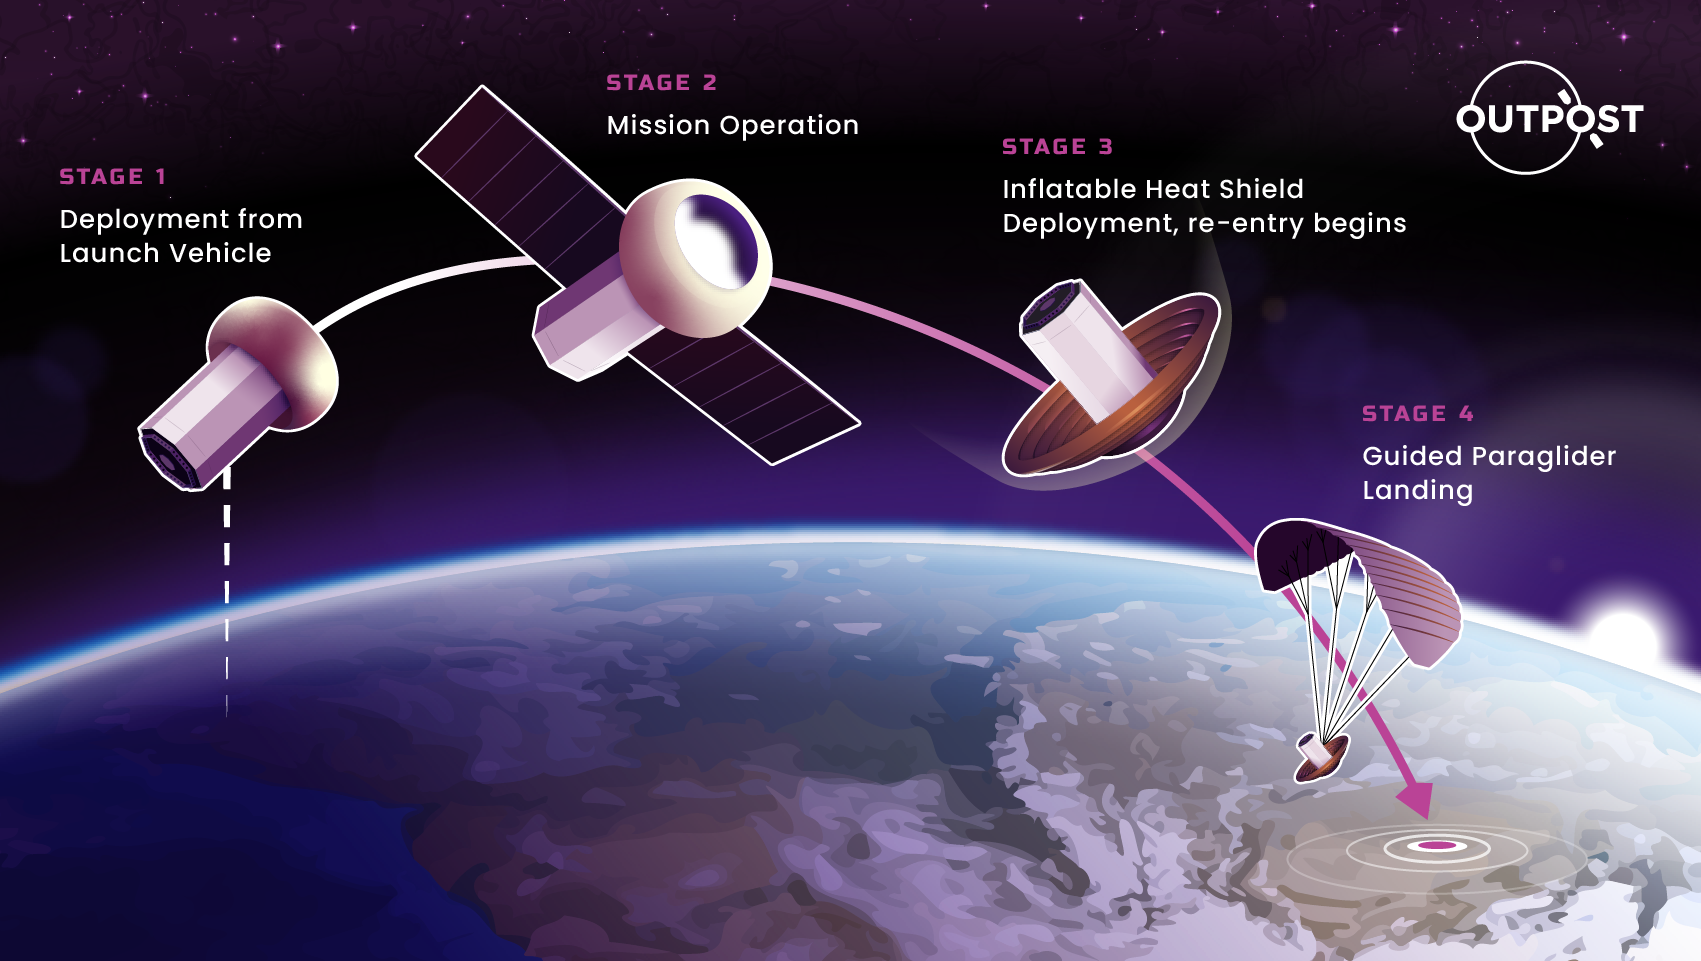 A four-step infographic describing the launch, deployment, and re-entry of space hardware using a spacecraft glider